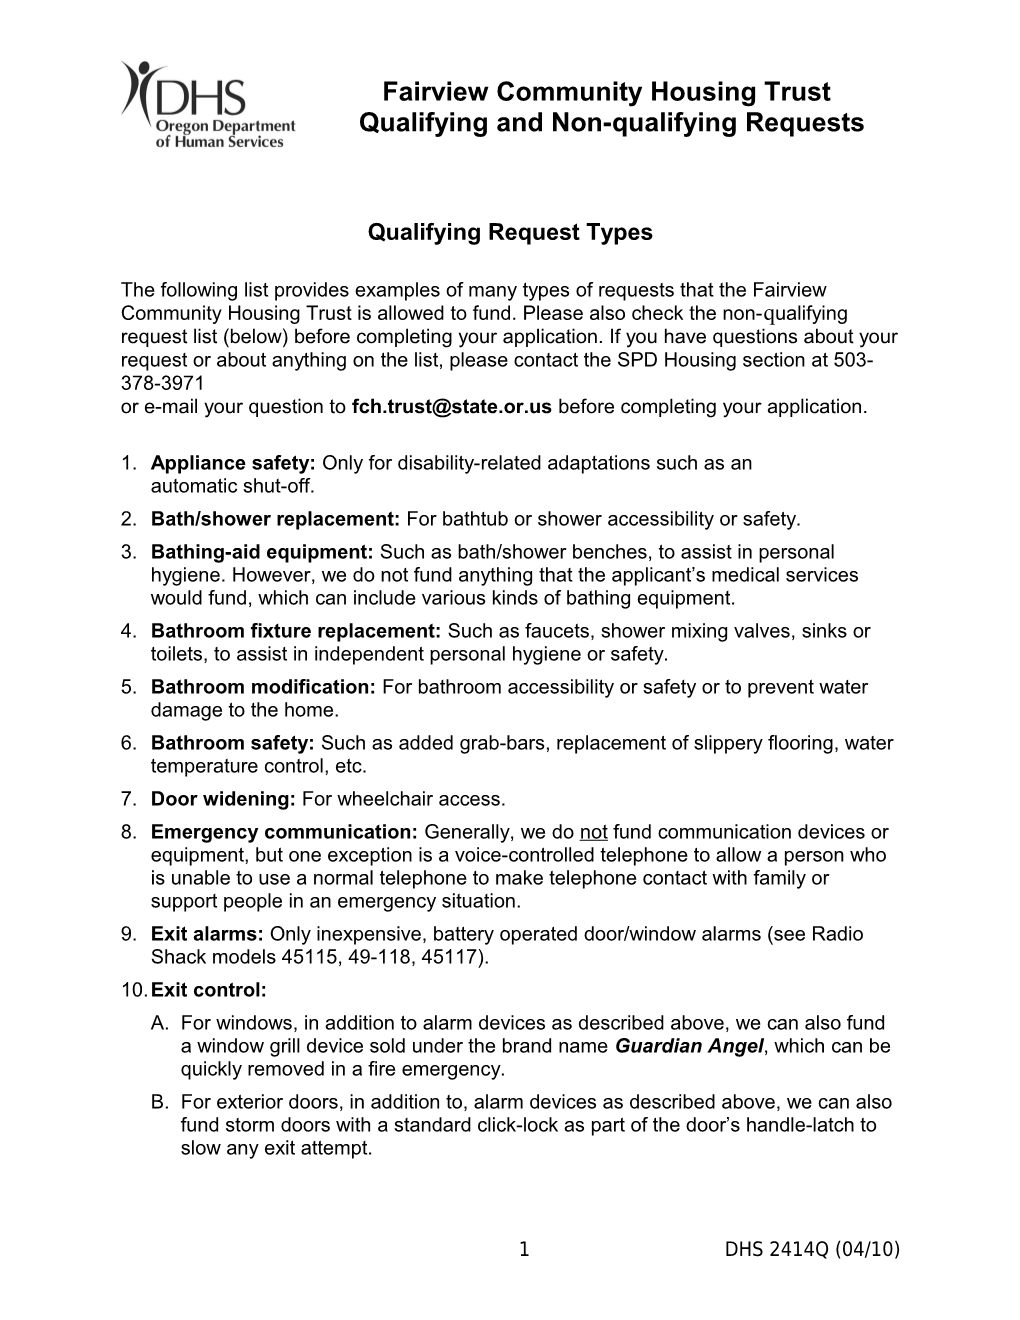 Fairview Community Housing Trust, Qualifying And Non-Qualifying Requests